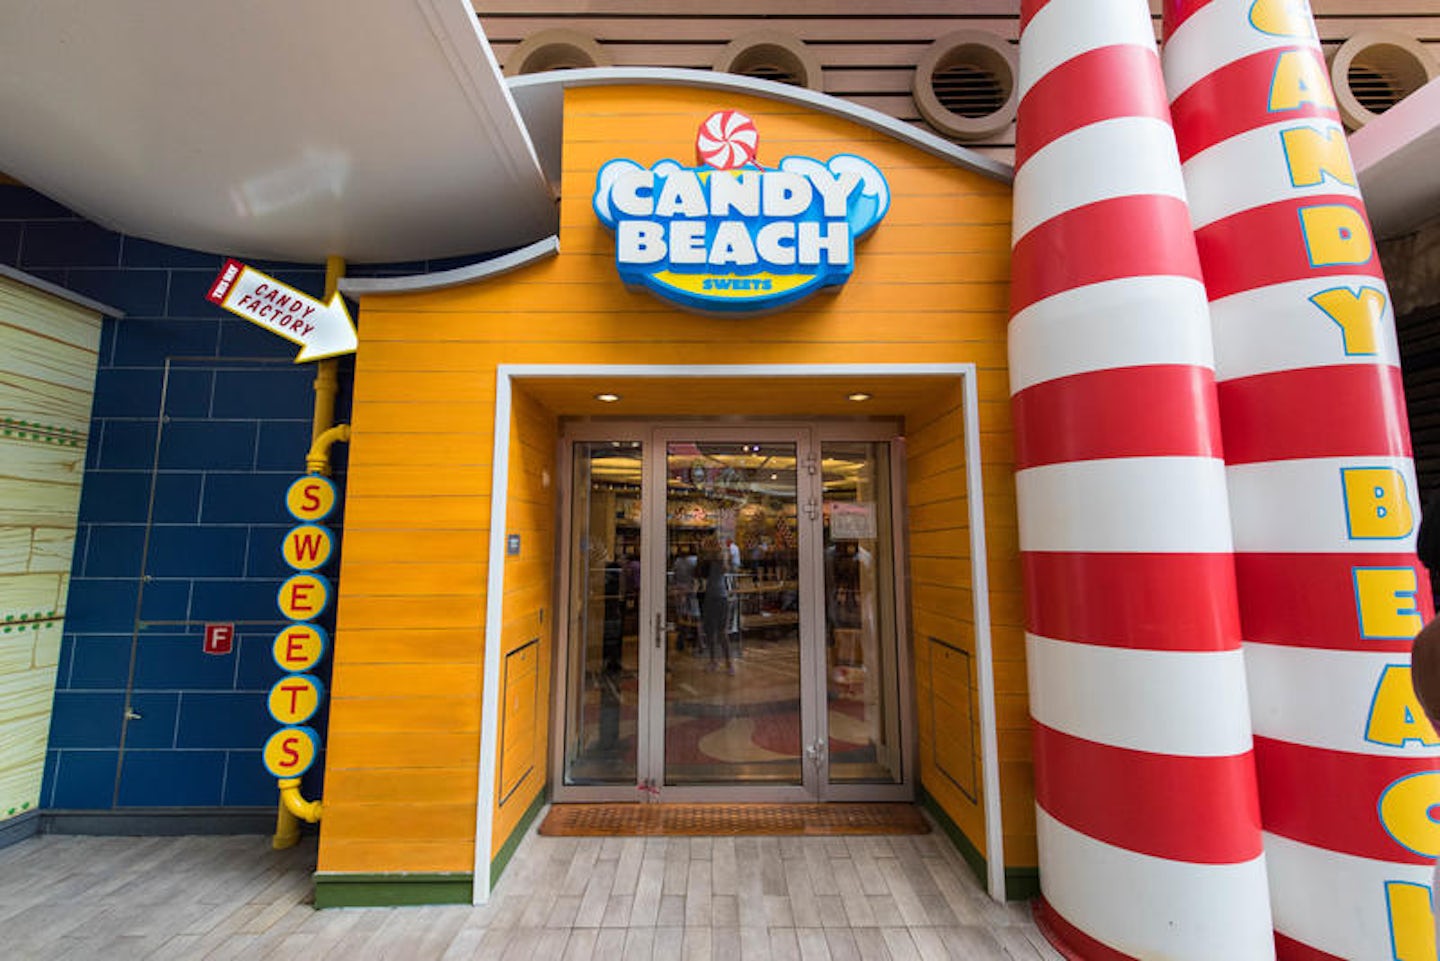 Candy Beach on Oasis of the Seas